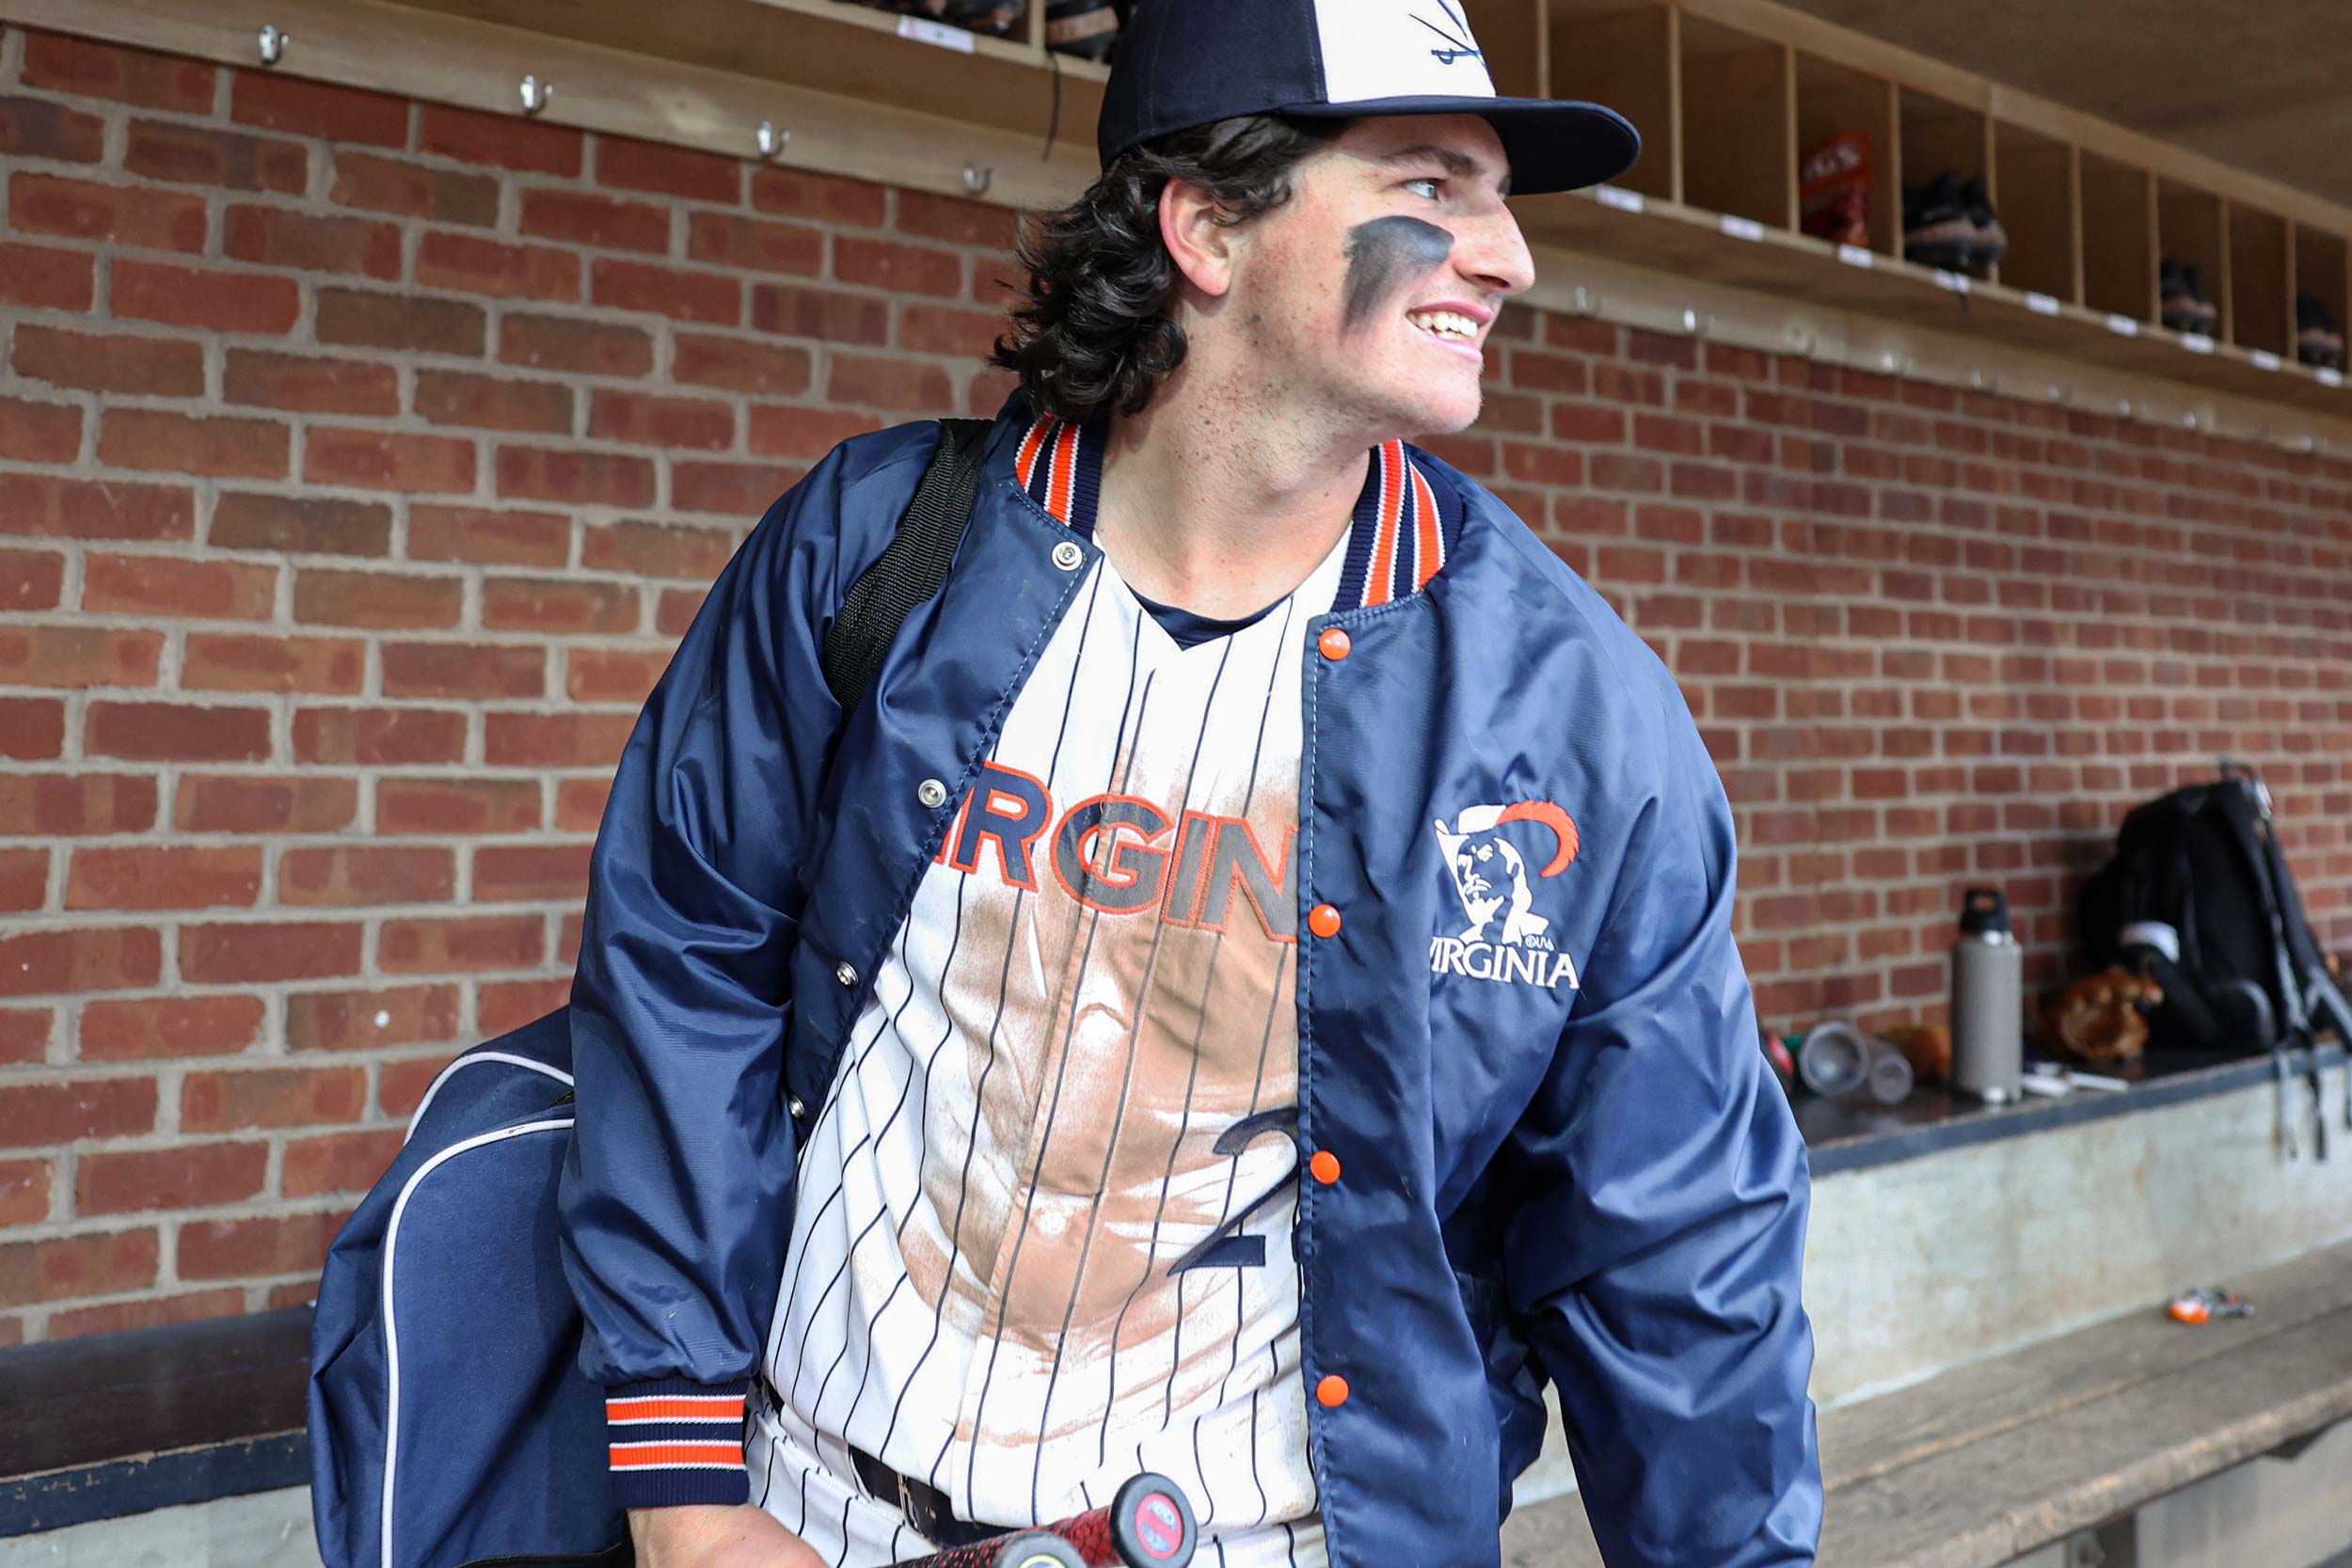 For UVA Baseball Players This Season, It's an Honor To Wear 'The Jacket